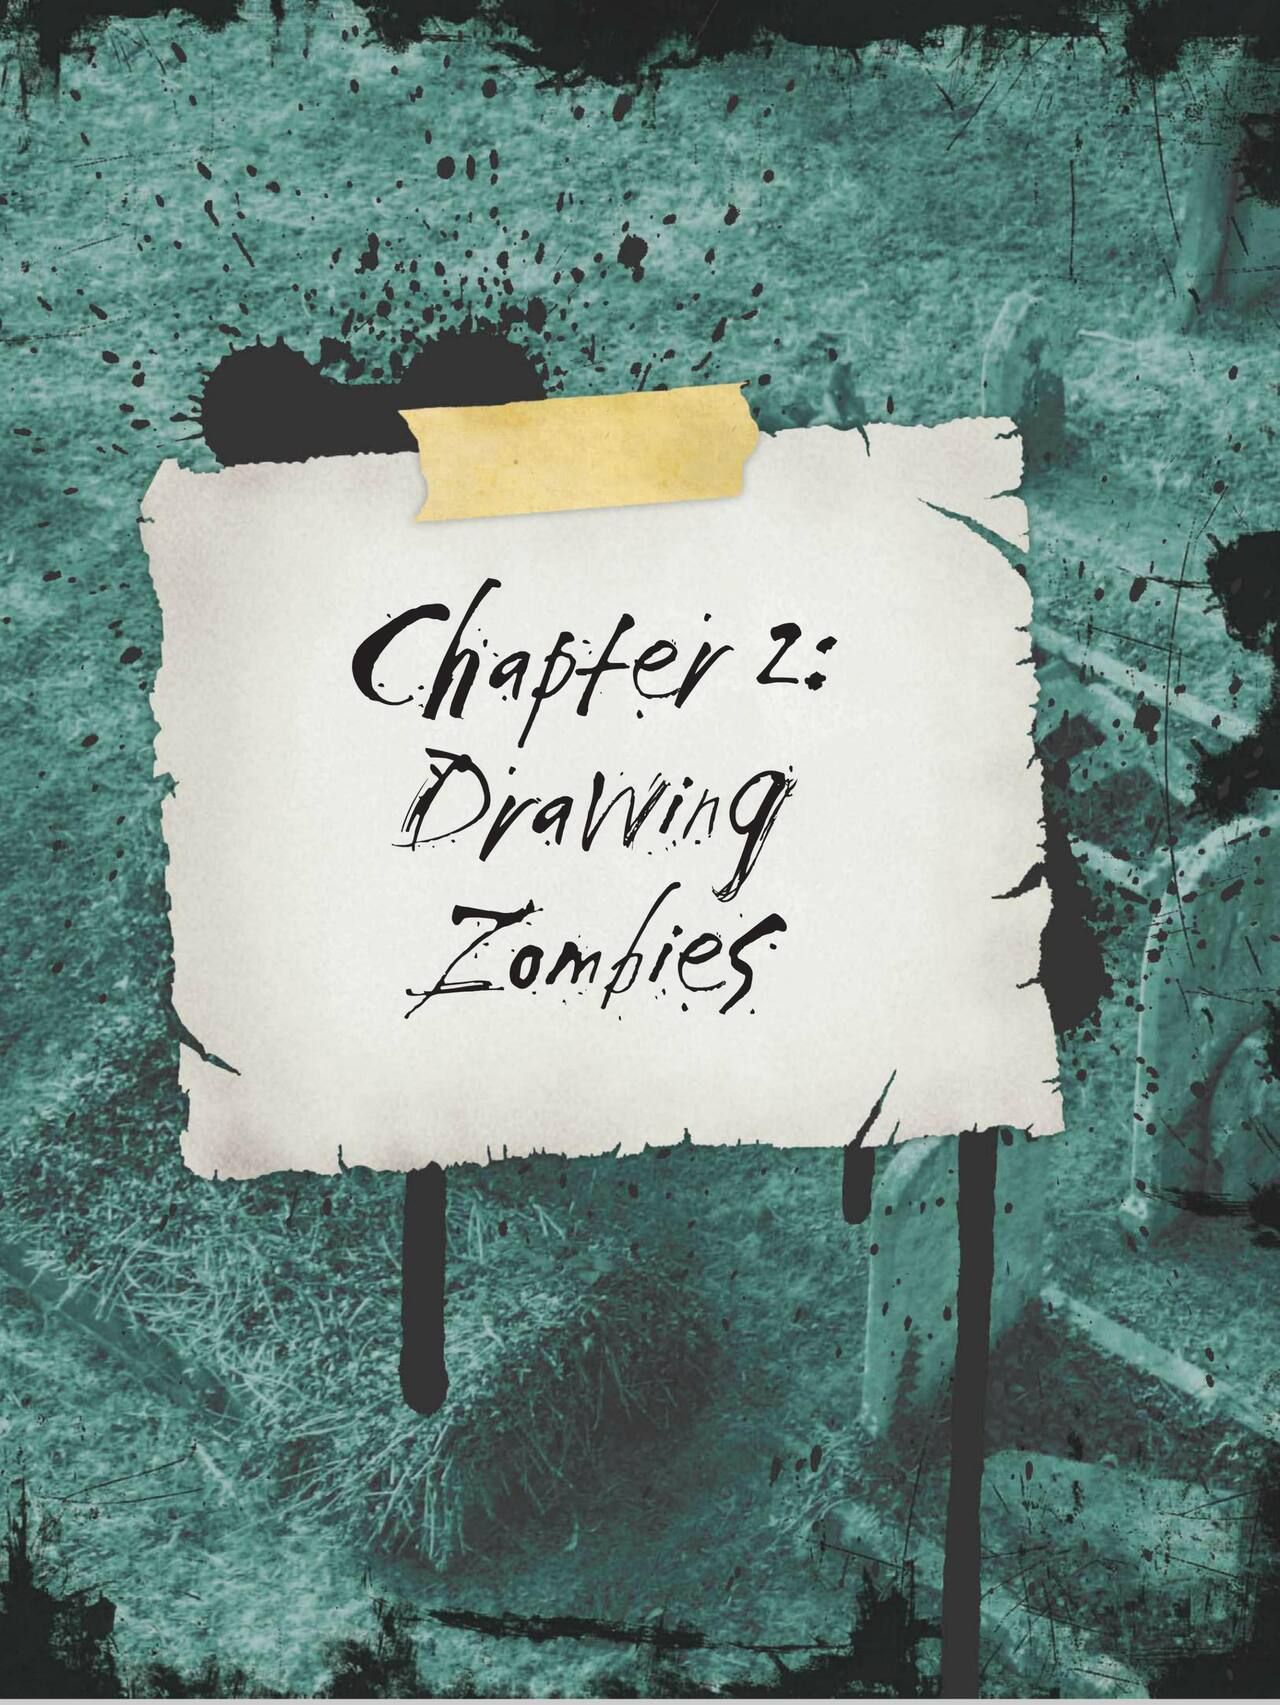 How to Draw Zombies: Discover the secrets to drawing, painting, and illustrating the undead 僵尸描绘集 22